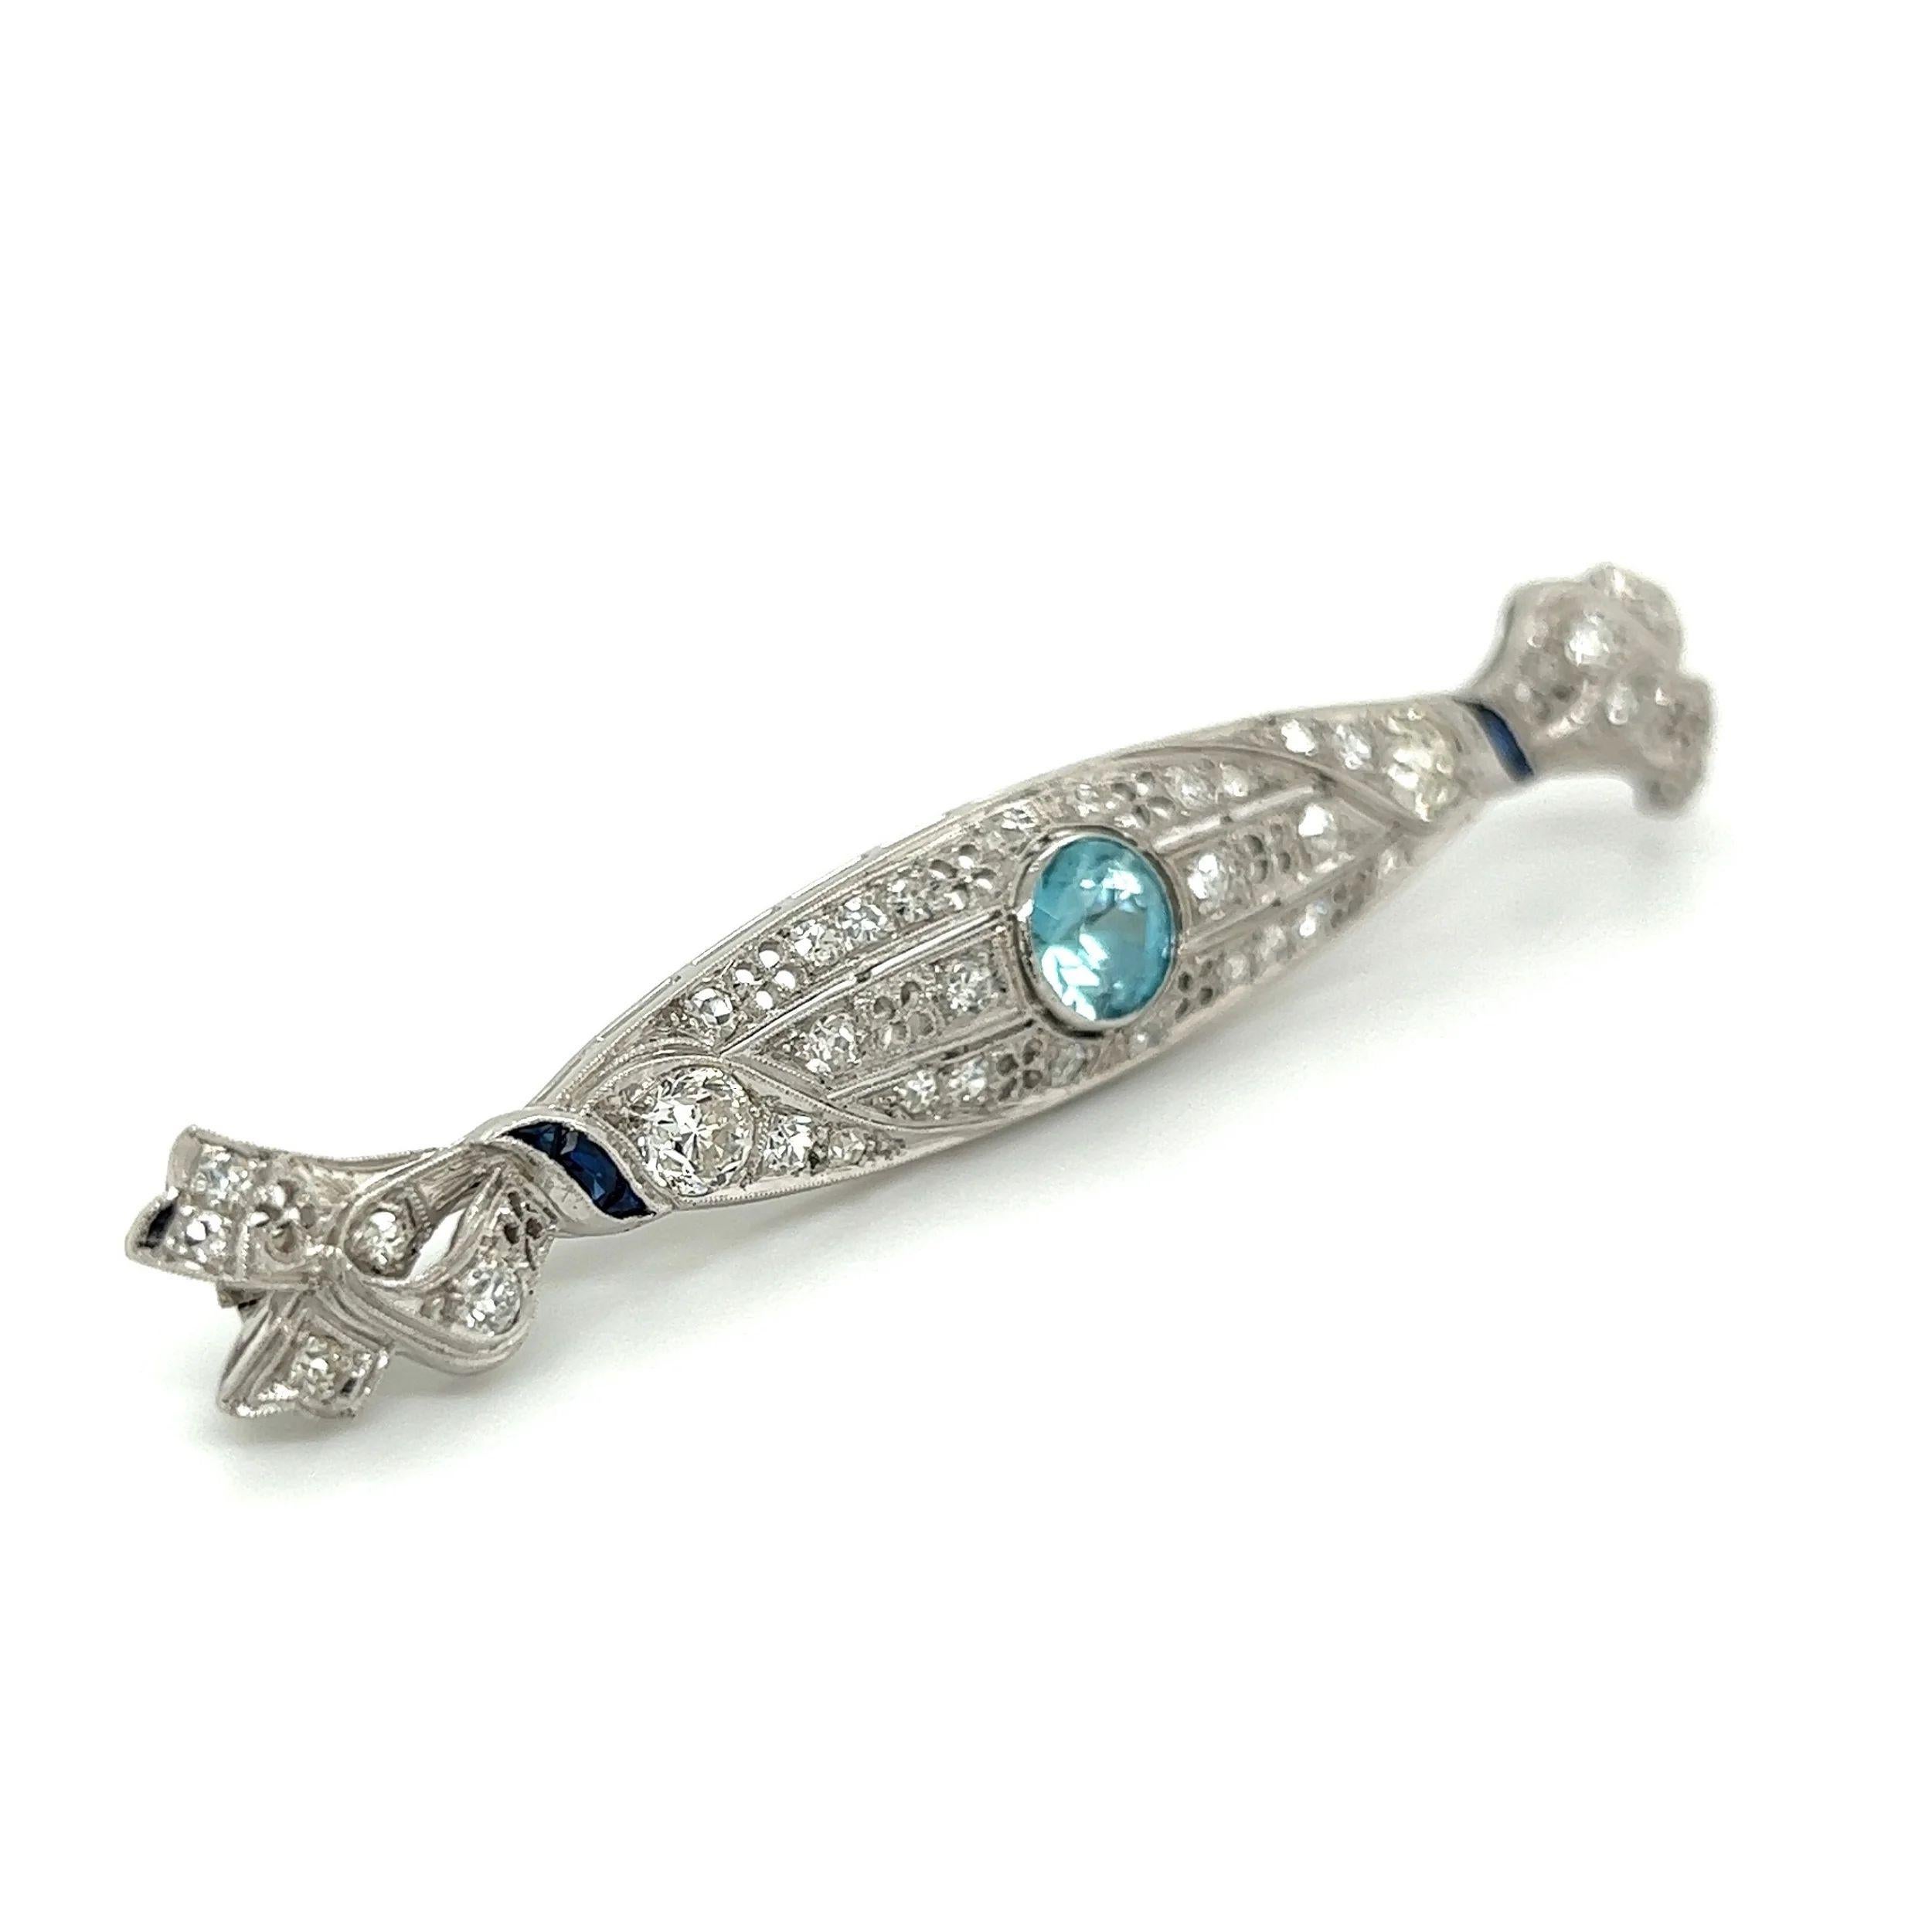 Simply Beautiful! Art Deco Blue Zircon Diamond and Sapphire Platinum Stylized Ribbon Bar Brooch Pin. Centering a 1.47 Carat Round Blue Zircon. Surrounded by Diamonds, approx. 1.28tcw and accented by Sapphires. Measuring approx. 2.75